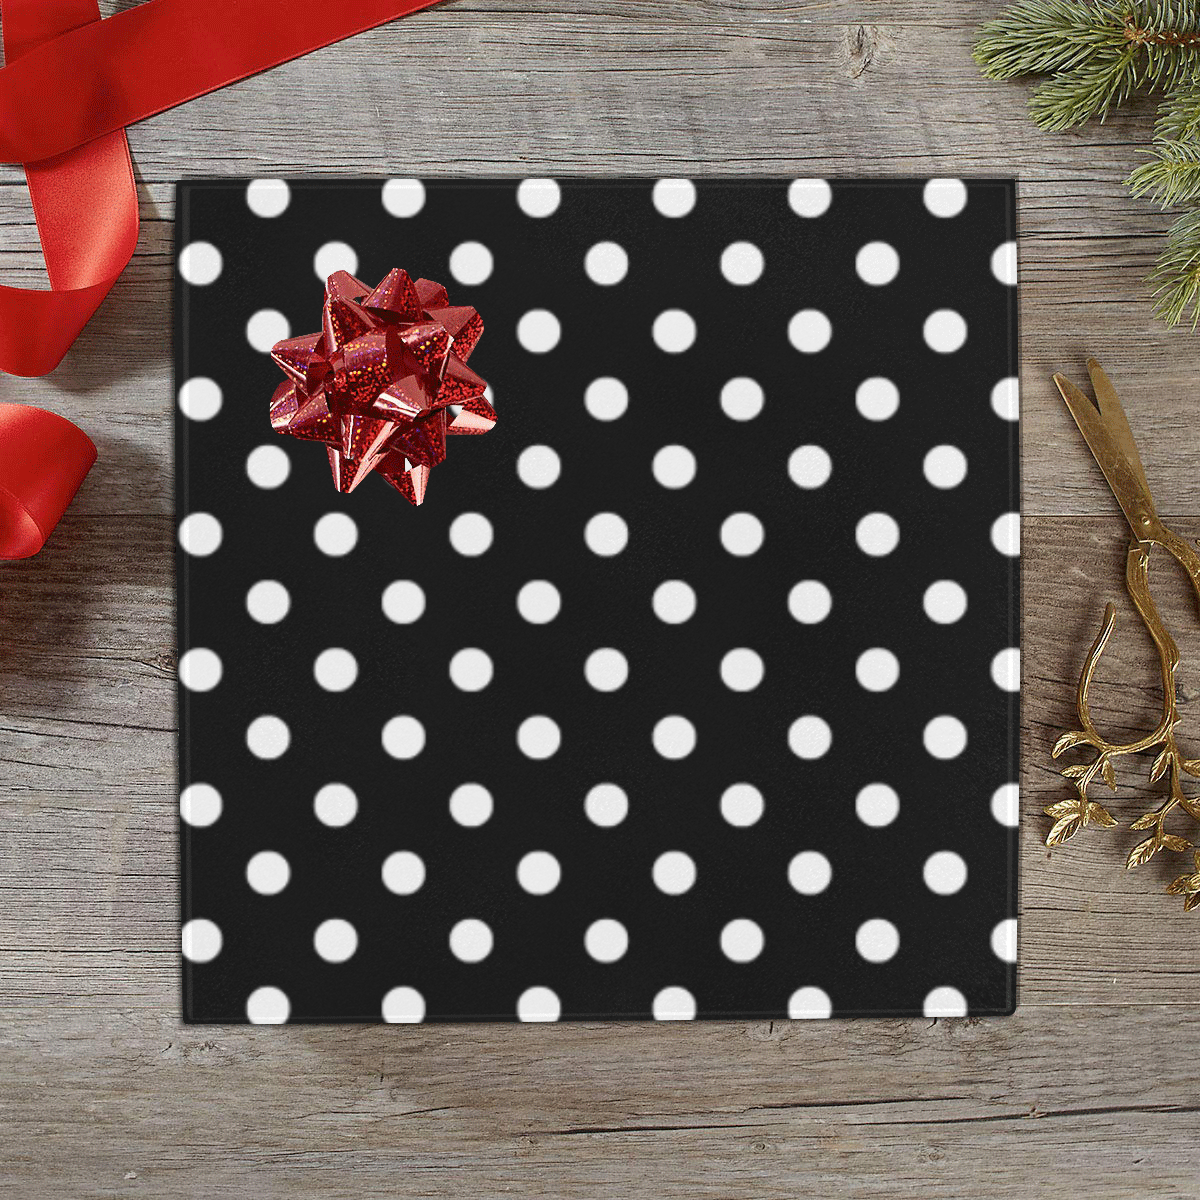 White Polka Dots on Black Gift Wrapping Paper 58"x 23" (5 Rolls)